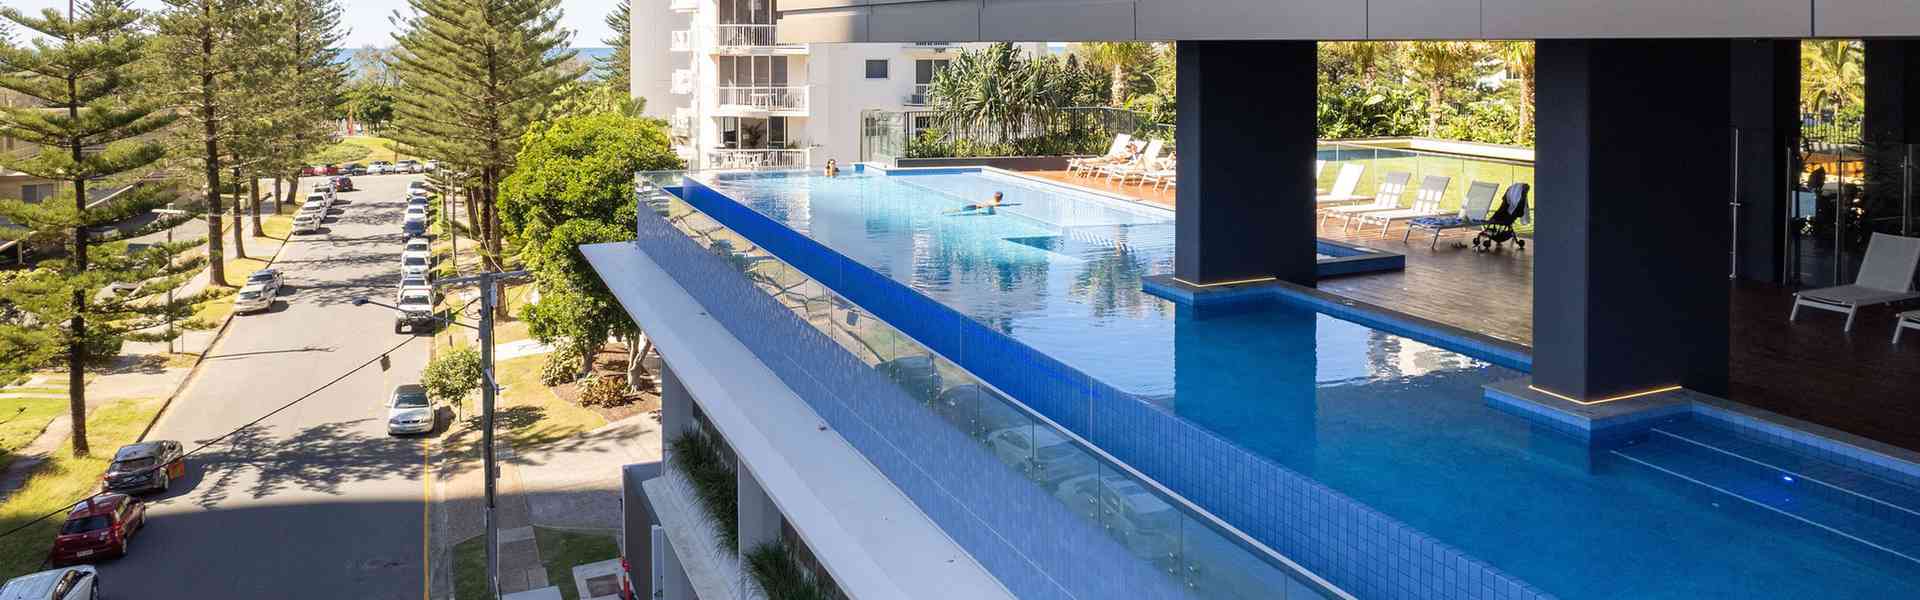 Discover ULTIQA Signature at Broadbeach - Accessible Accommodation 